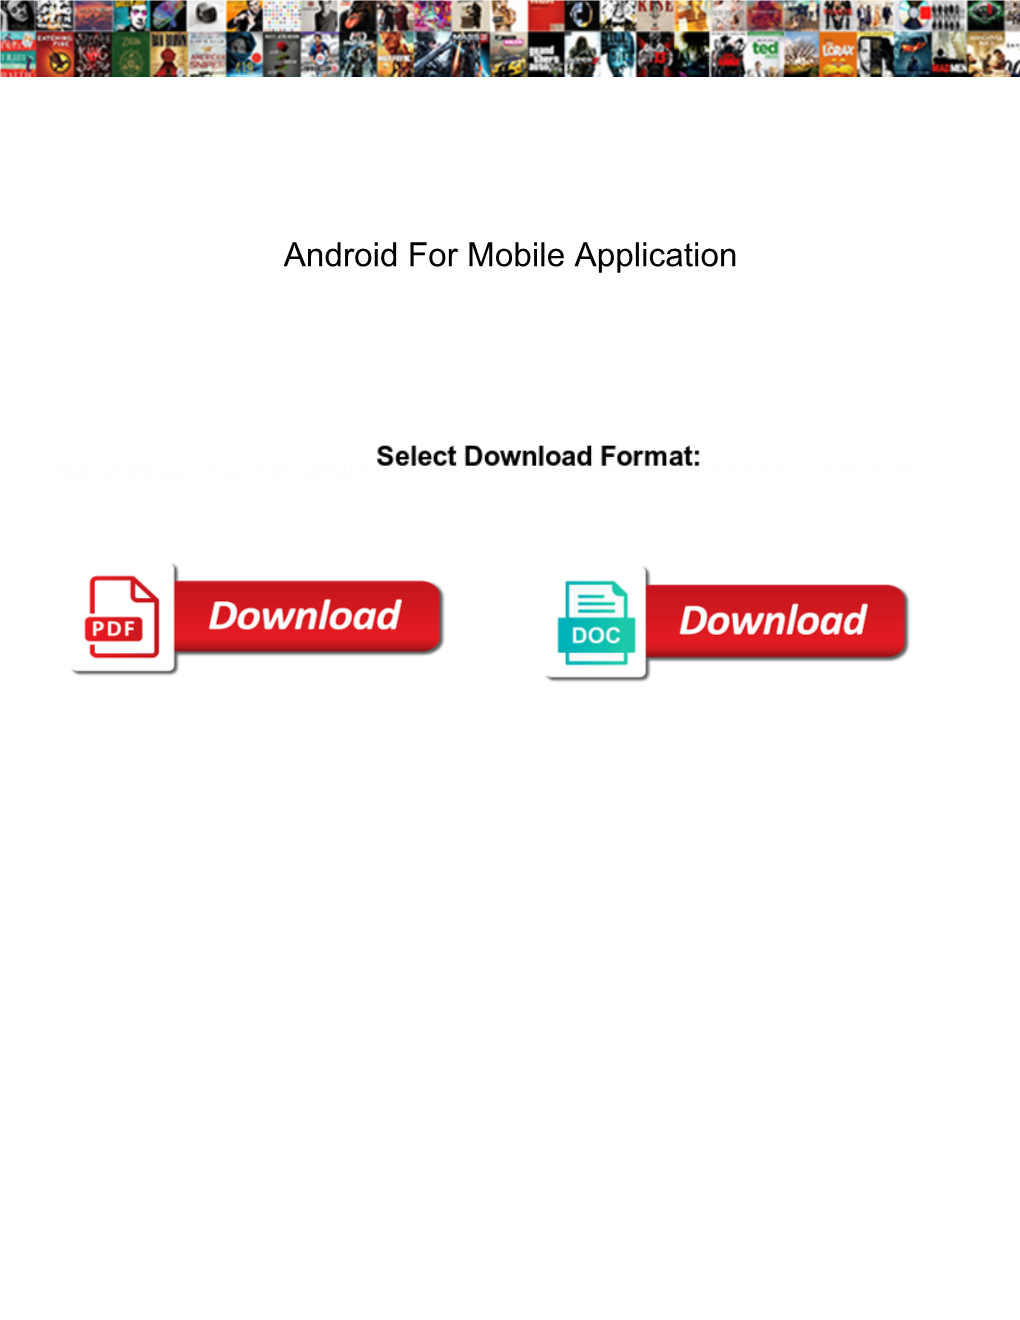 Android for Mobile Application